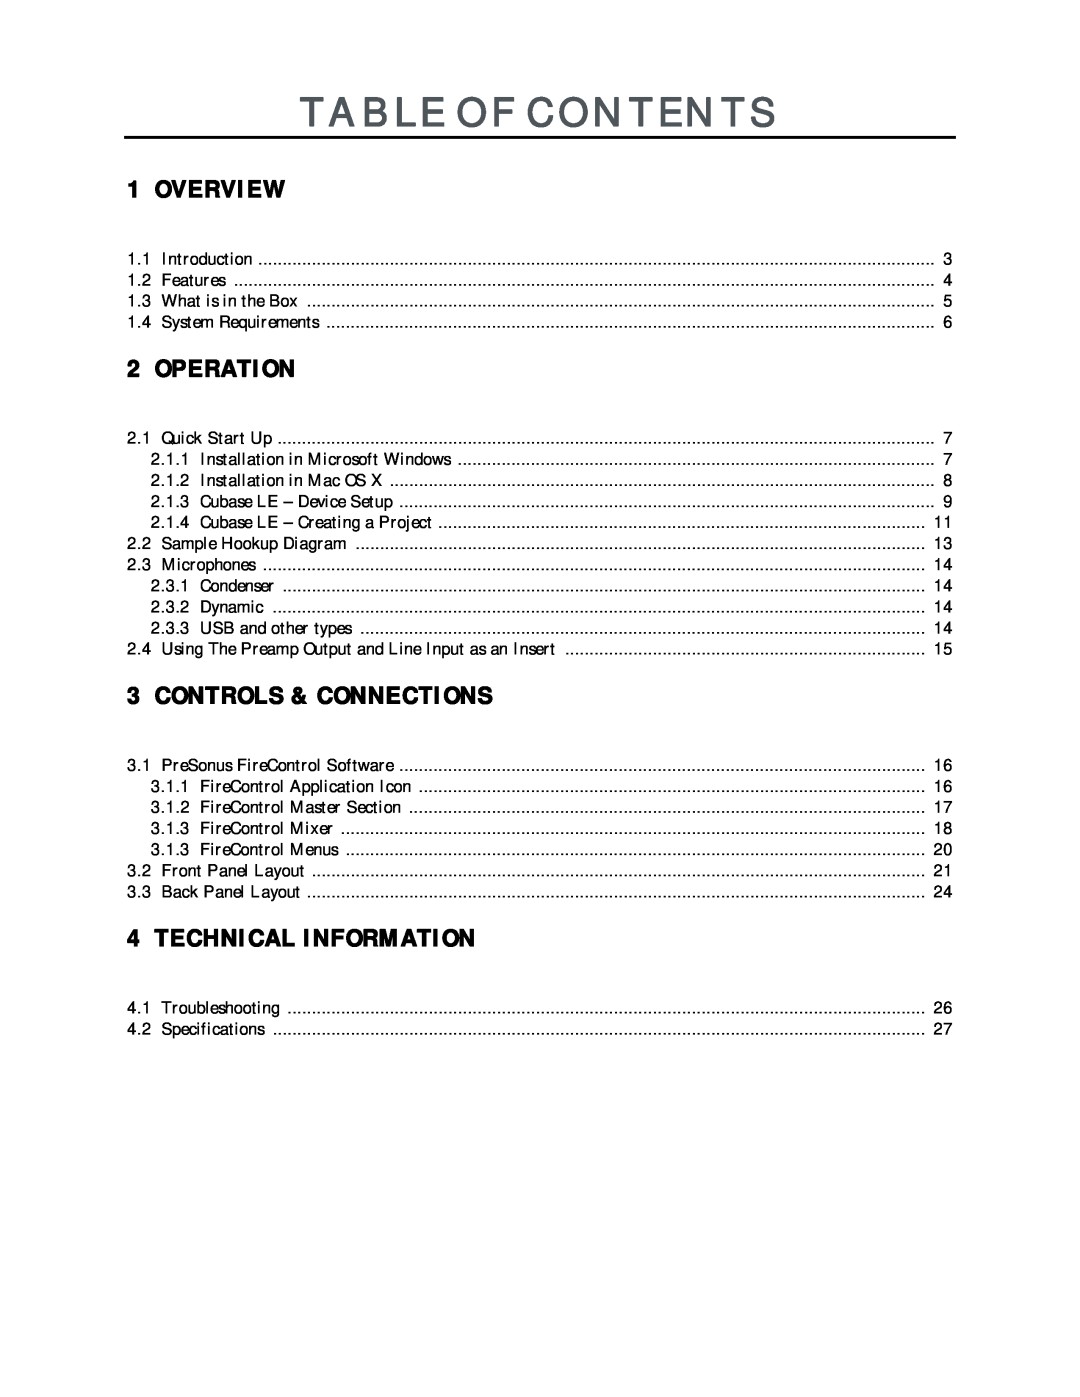 Presonus Audio electronic Version 1.0 user manual Table Of Contents, Overview, Operation, Controls & Connections 